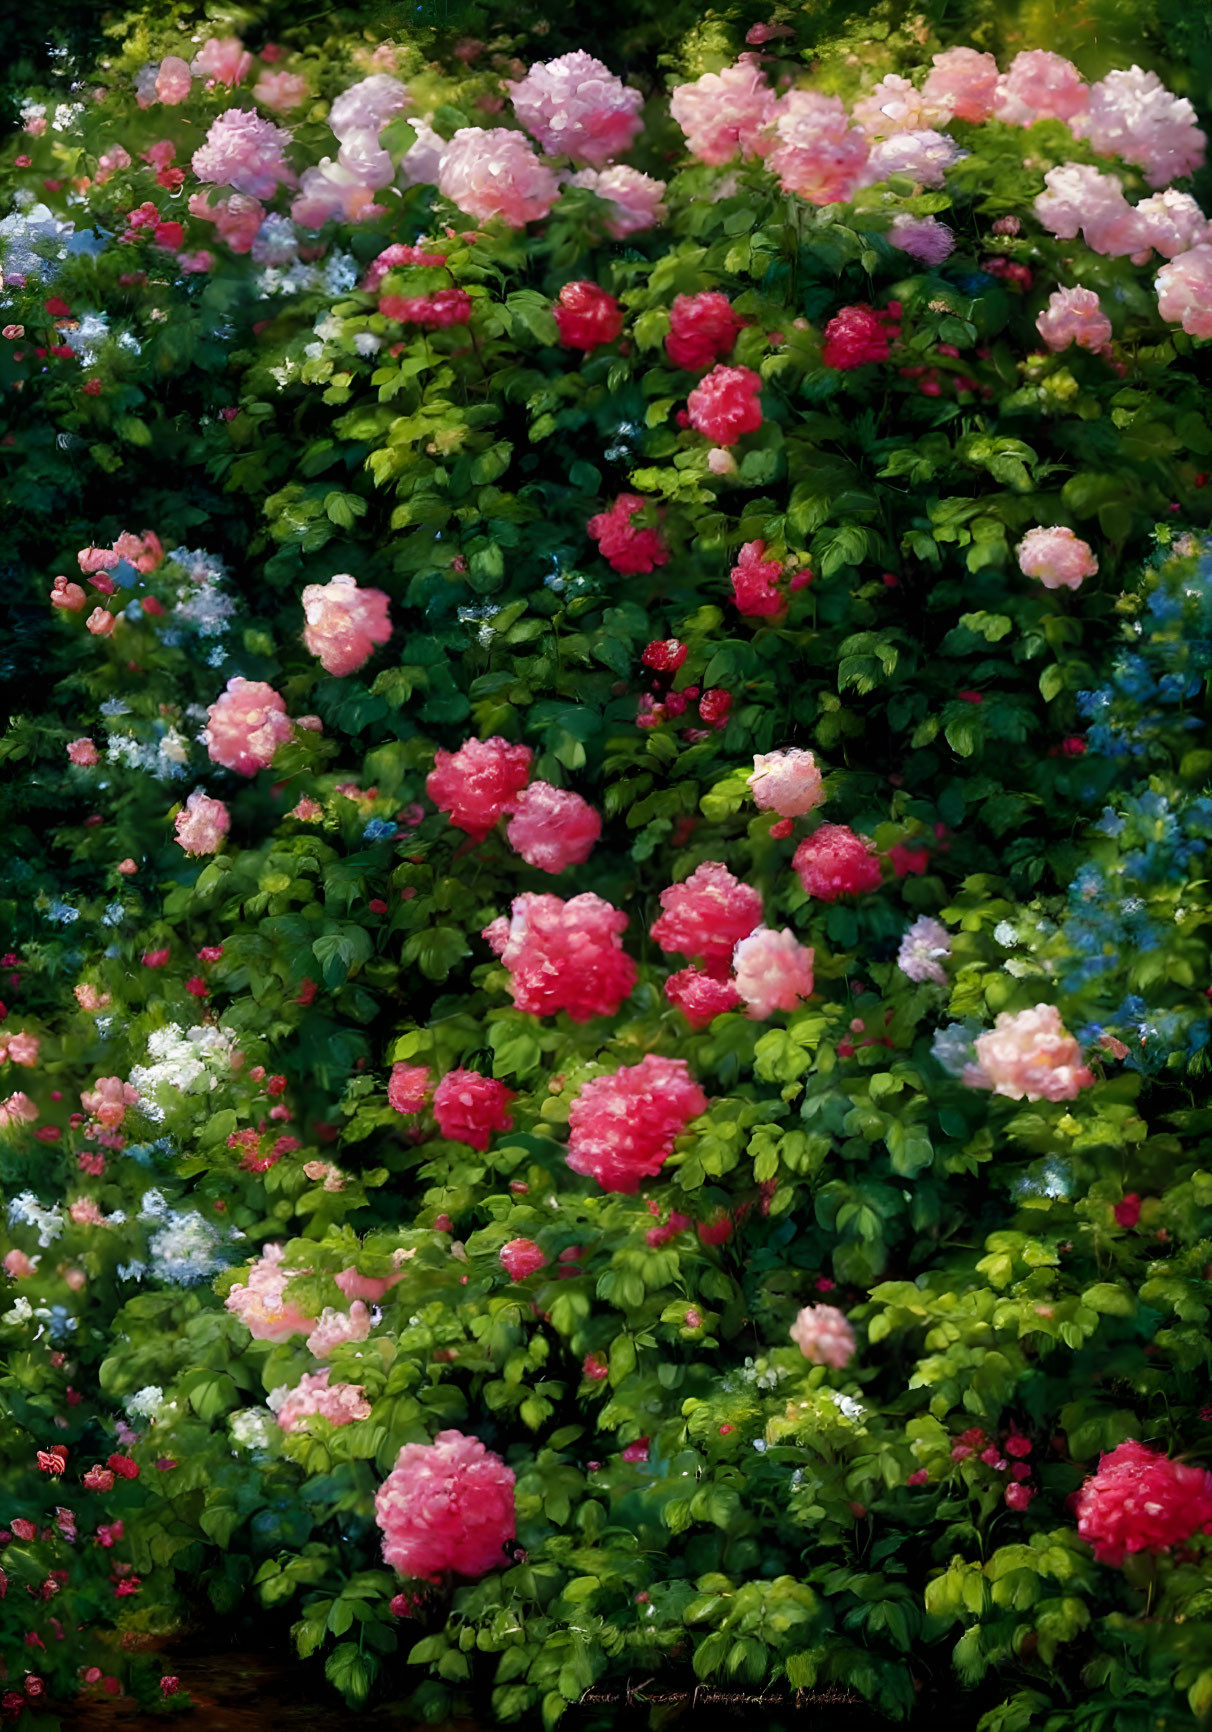 Vibrant blooming roses in pink, red, and white hues in lush garden landscape